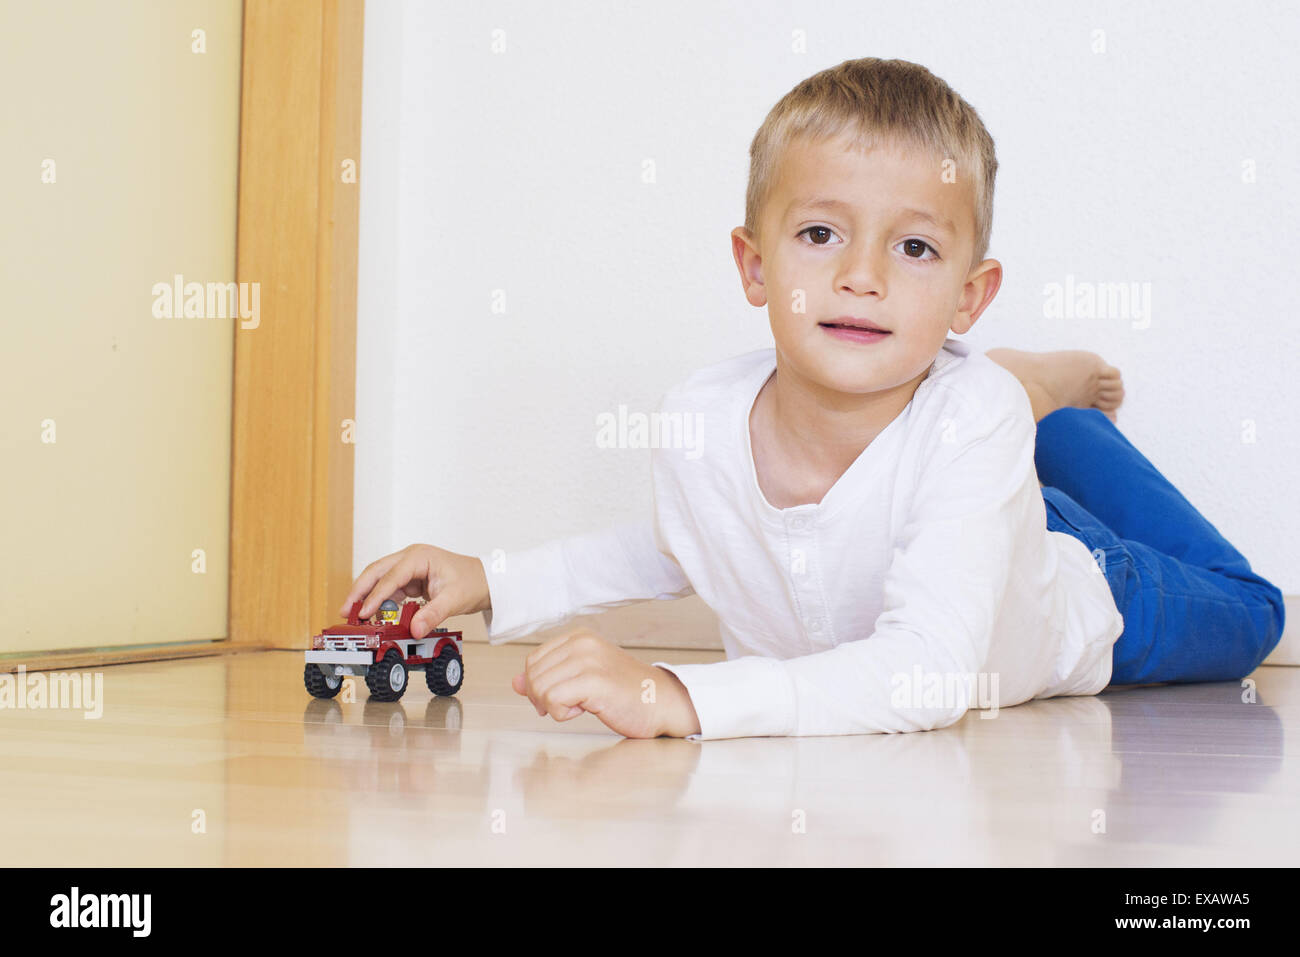 Boy lying on floor playing with toy truck Stock Photo